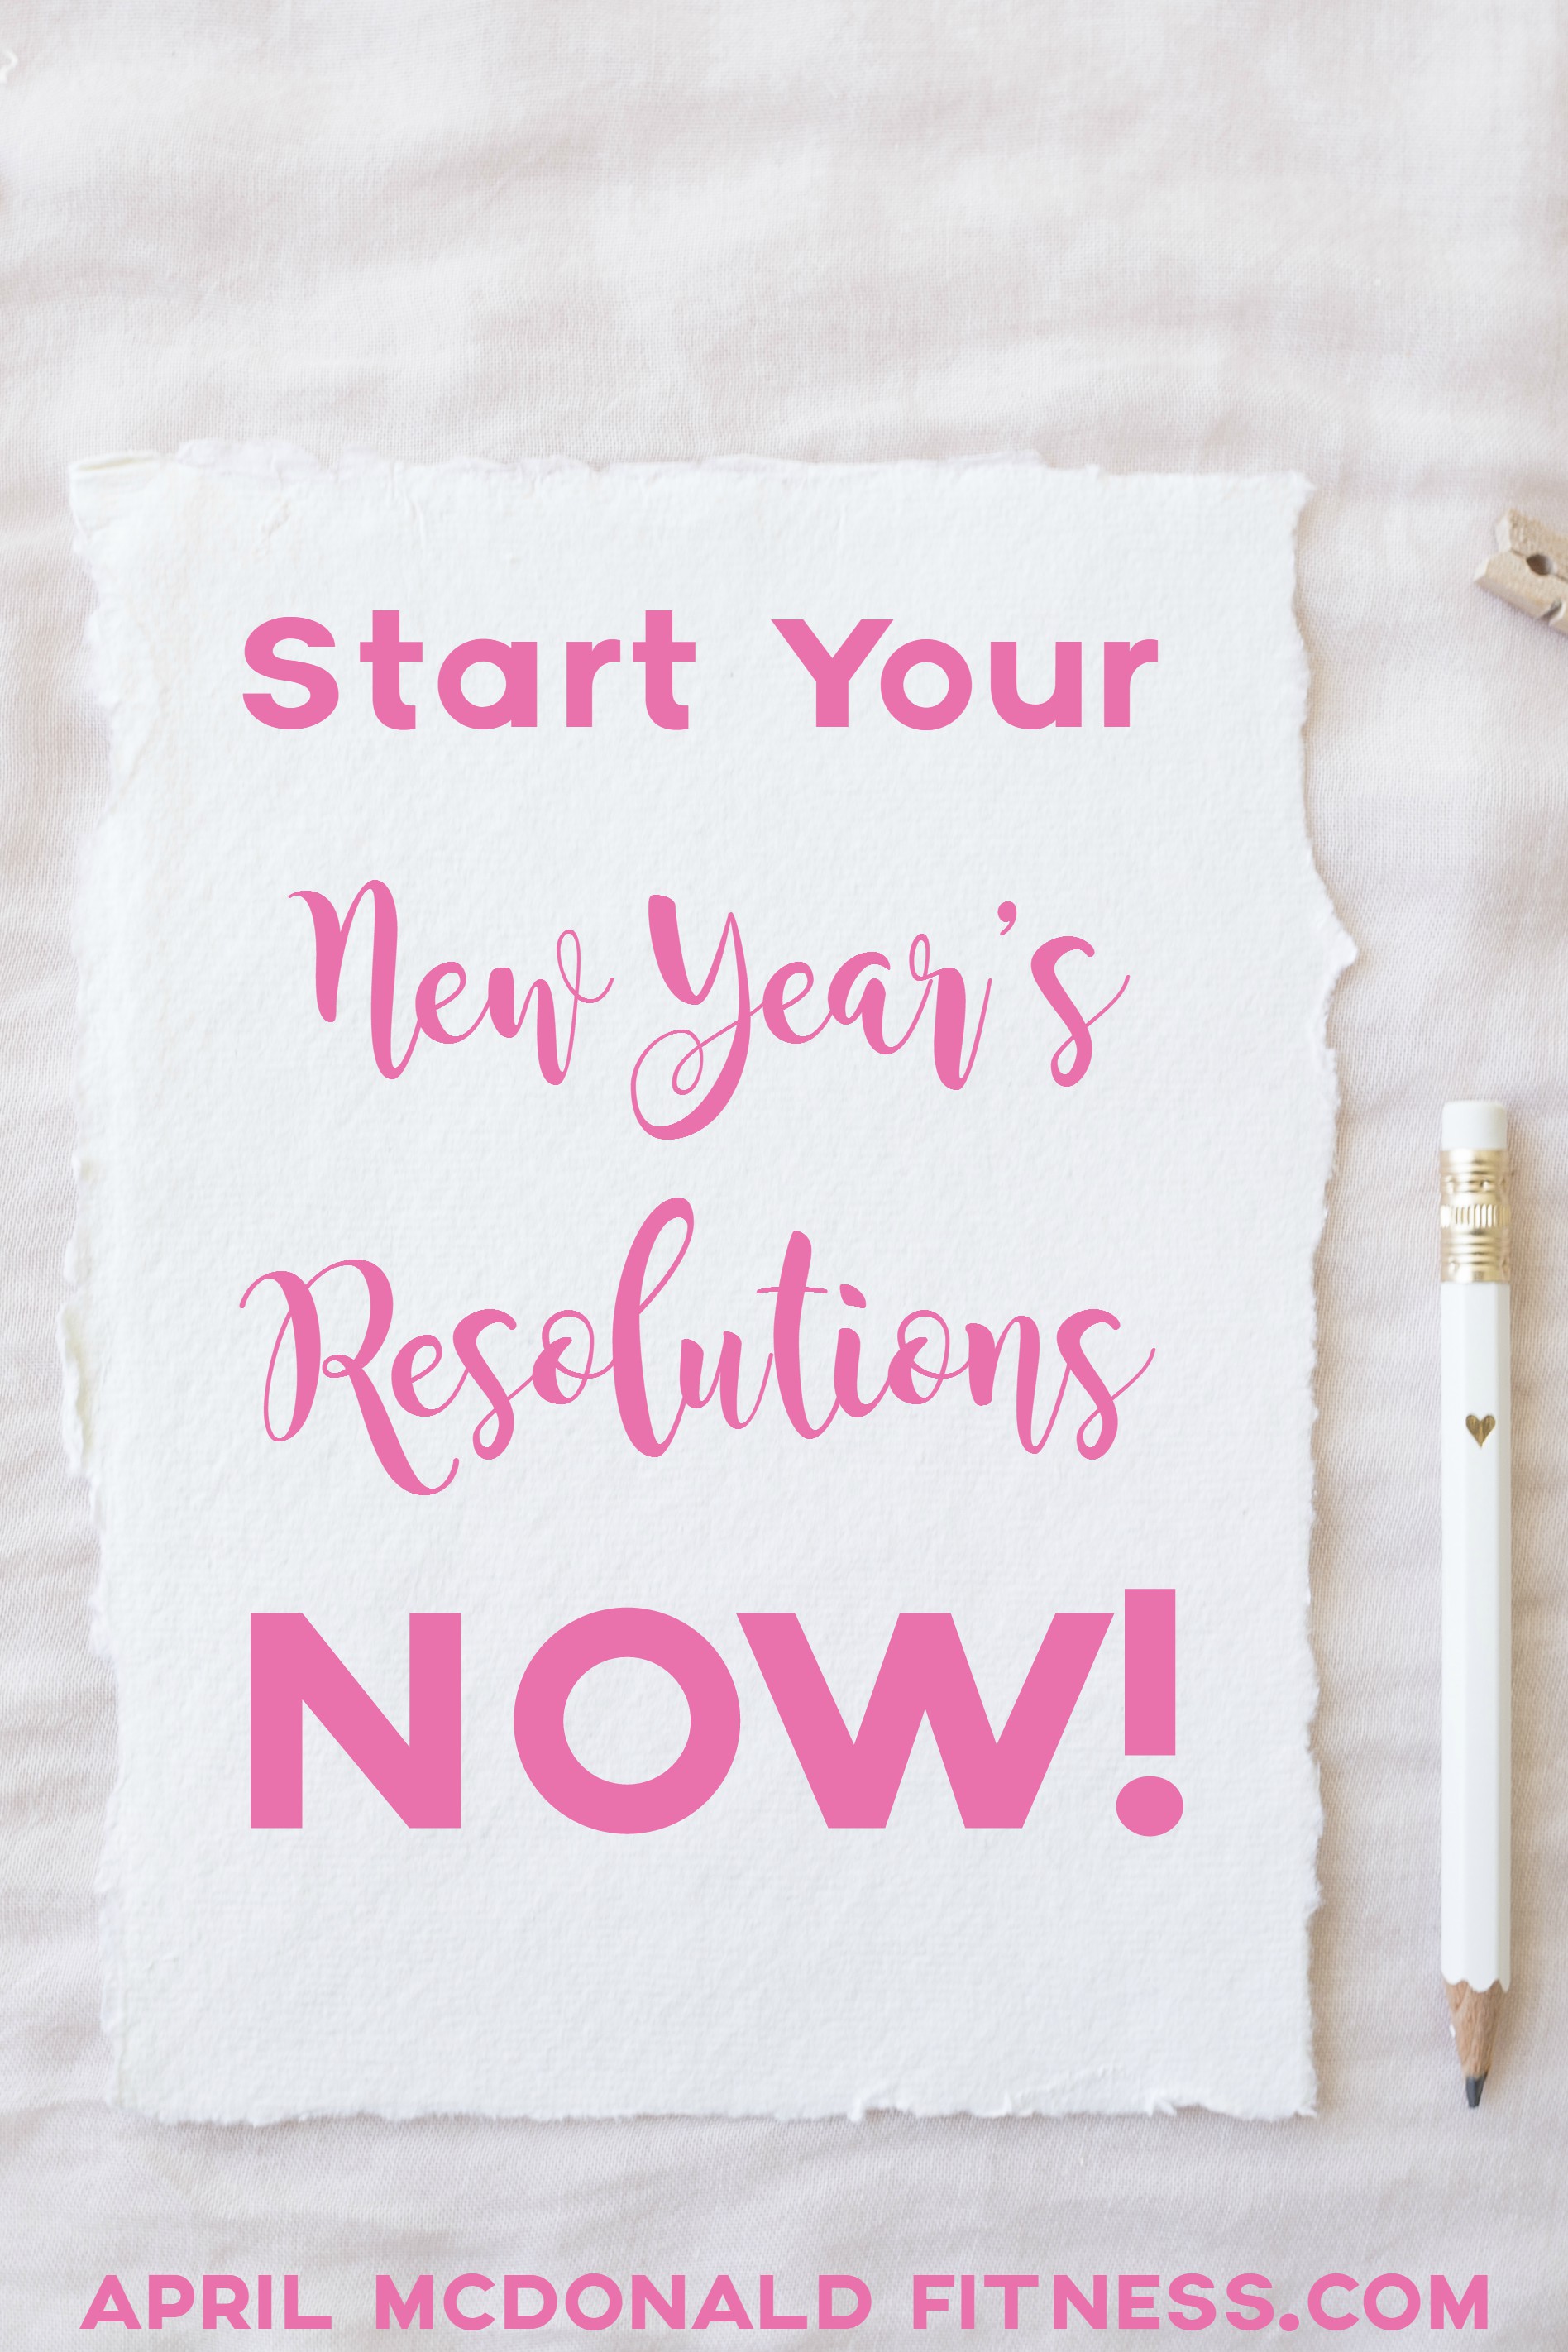 Don't fret about starting New Year's resolutions on January 1st. Start them now. Today is the perfect day to change!